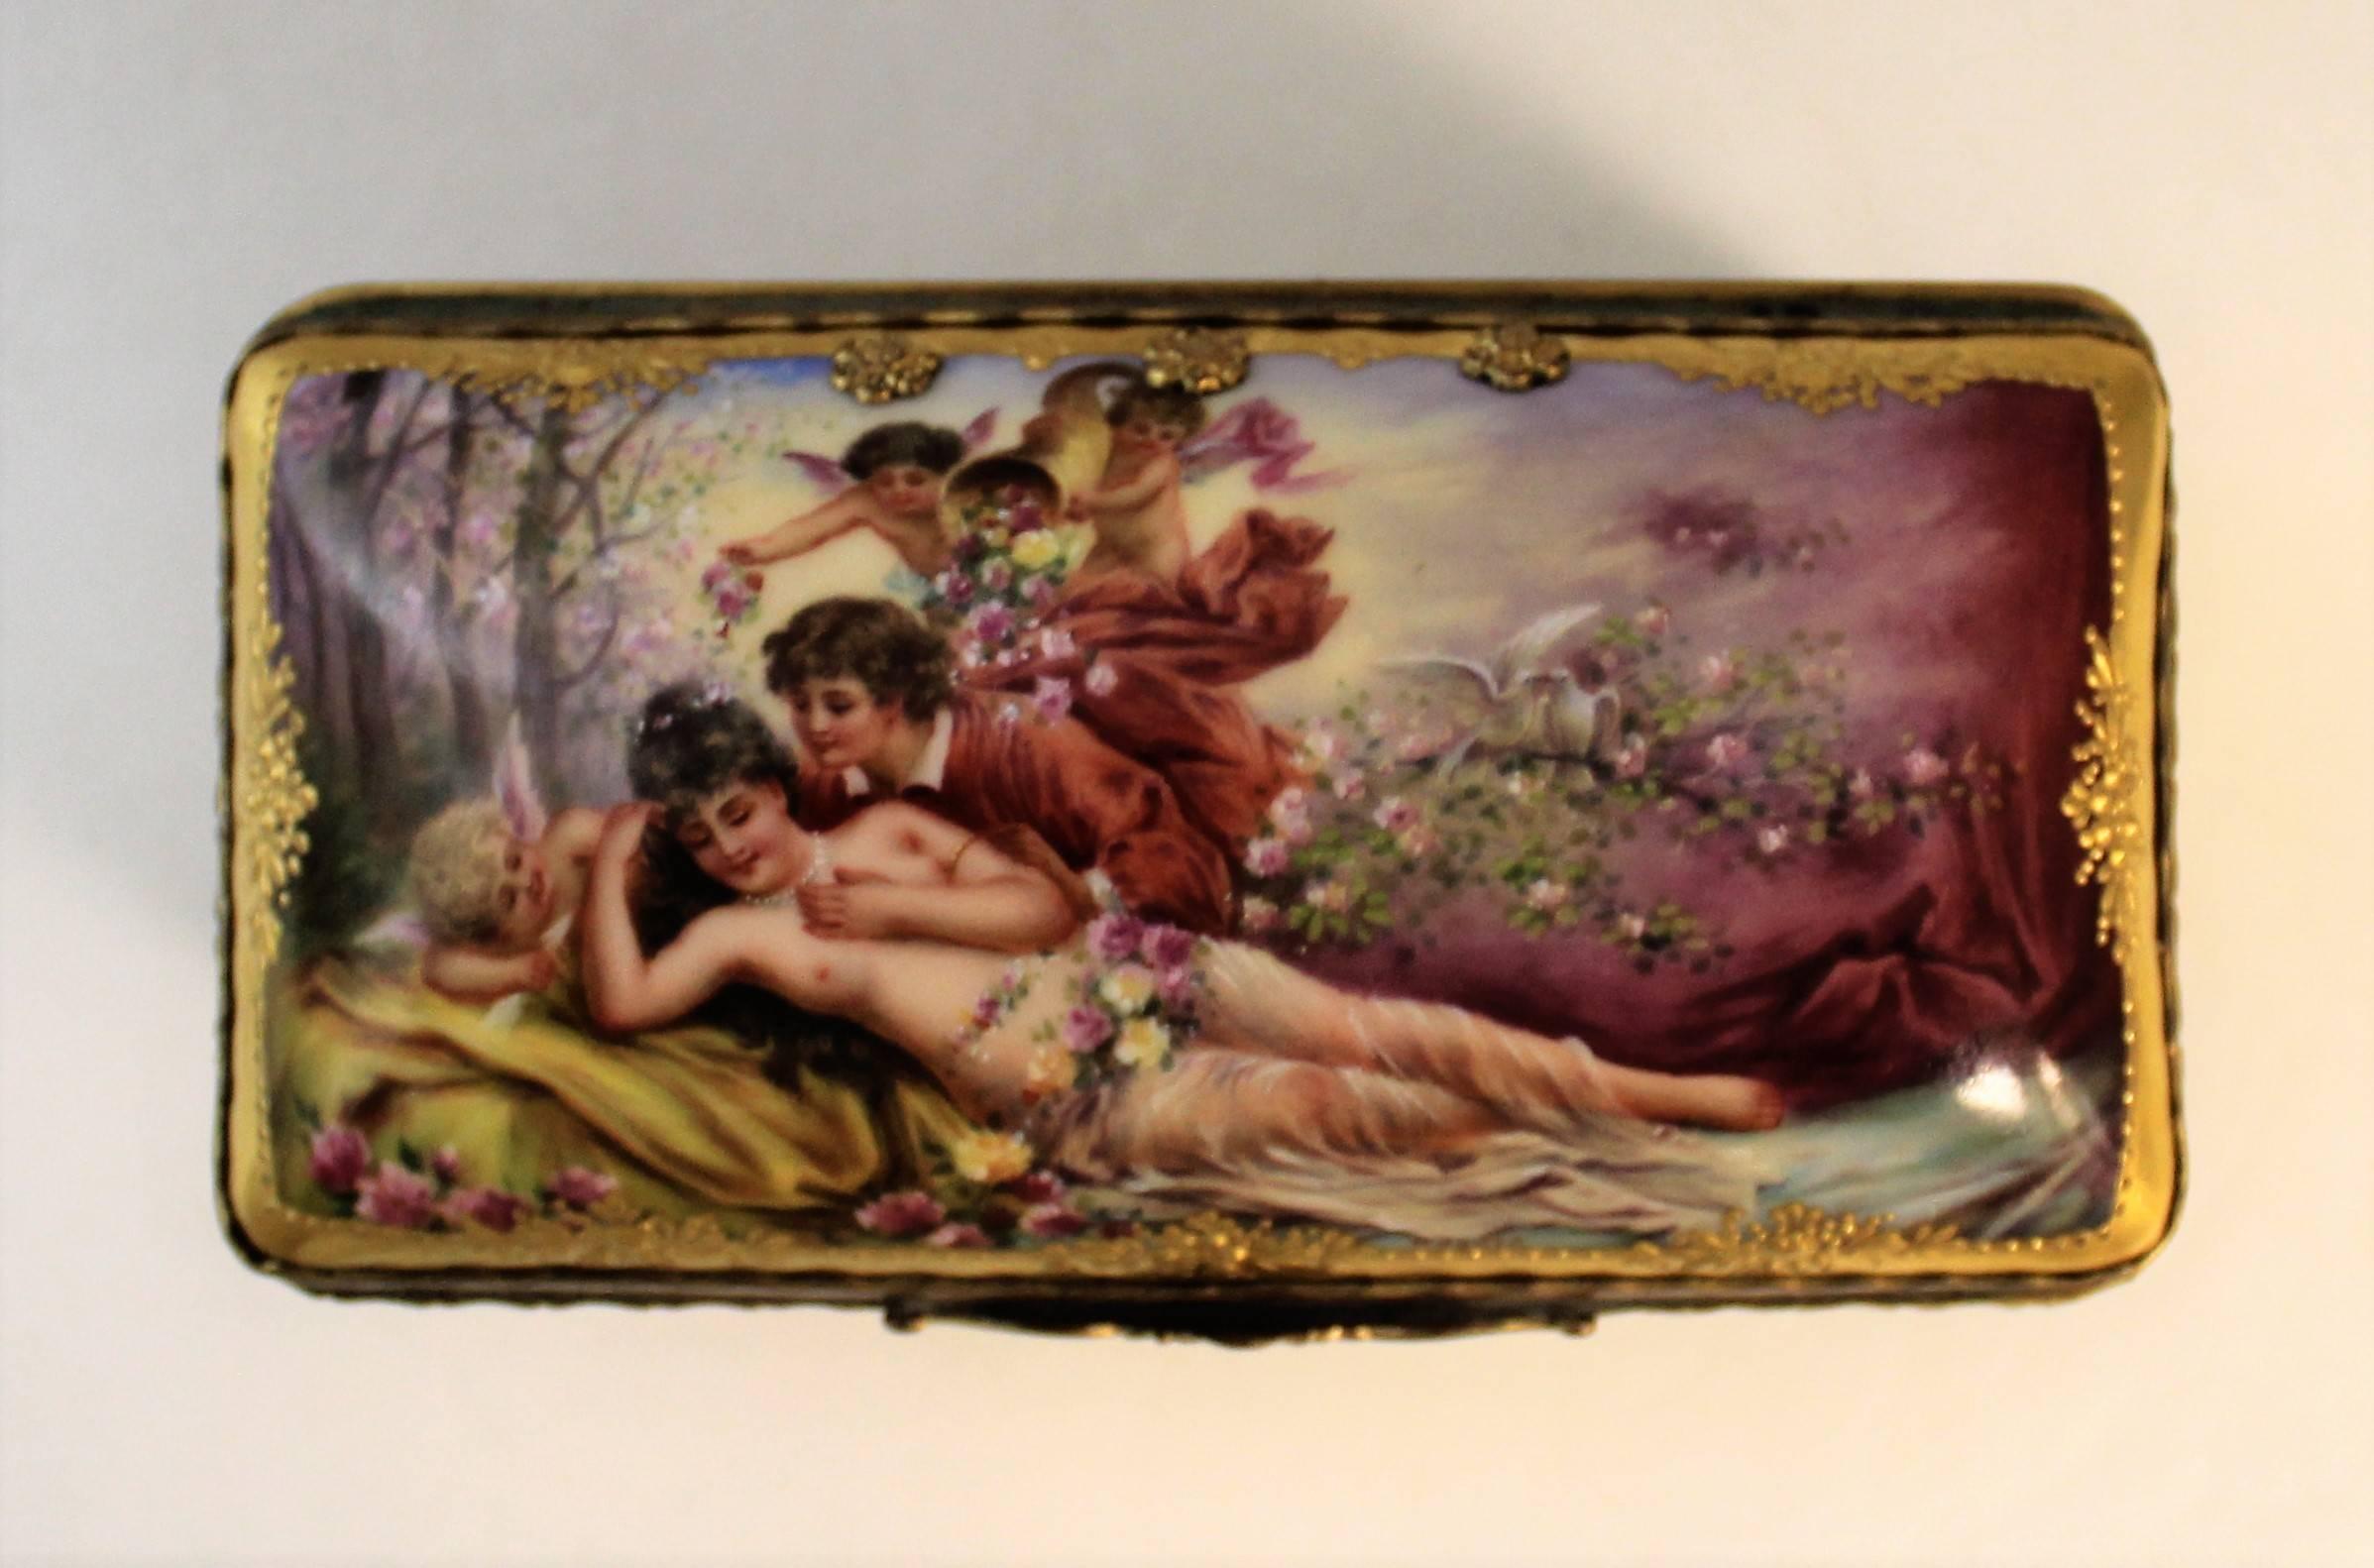 Porcelain box signed 'Wagner' with elaborate jewelled gilding and hand-painted romantic scene.